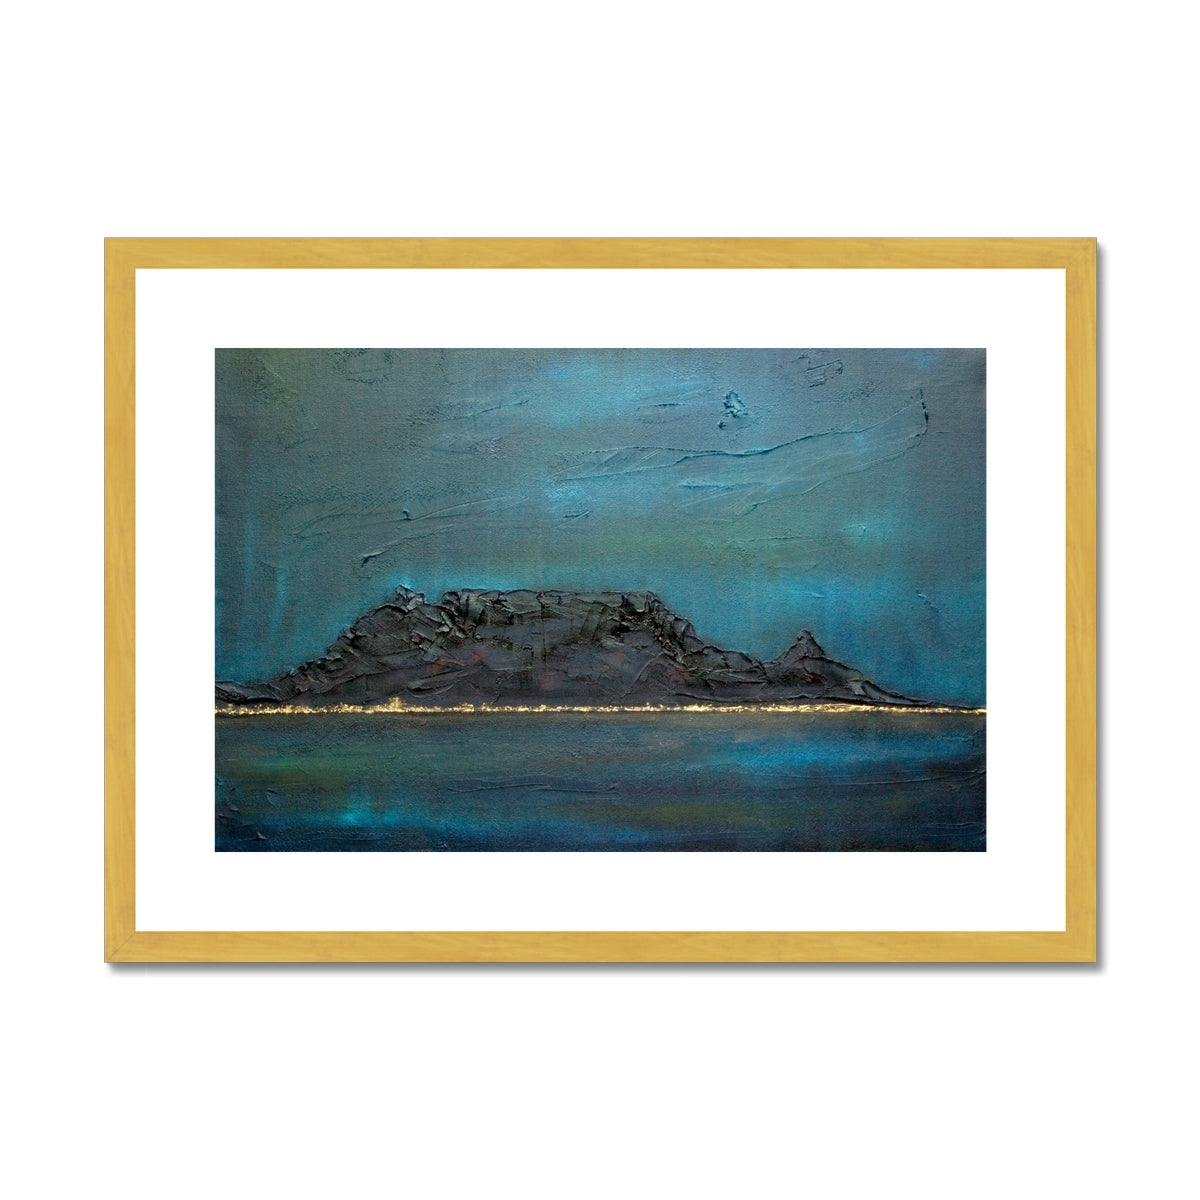 Table Mountain Dusk Painting | Antique Framed & Mounted Prints From Scotland-Antique Framed & Mounted Prints-World Art Gallery-A2 Landscape-Gold Frame-Paintings, Prints, Homeware, Art Gifts From Scotland By Scottish Artist Kevin Hunter